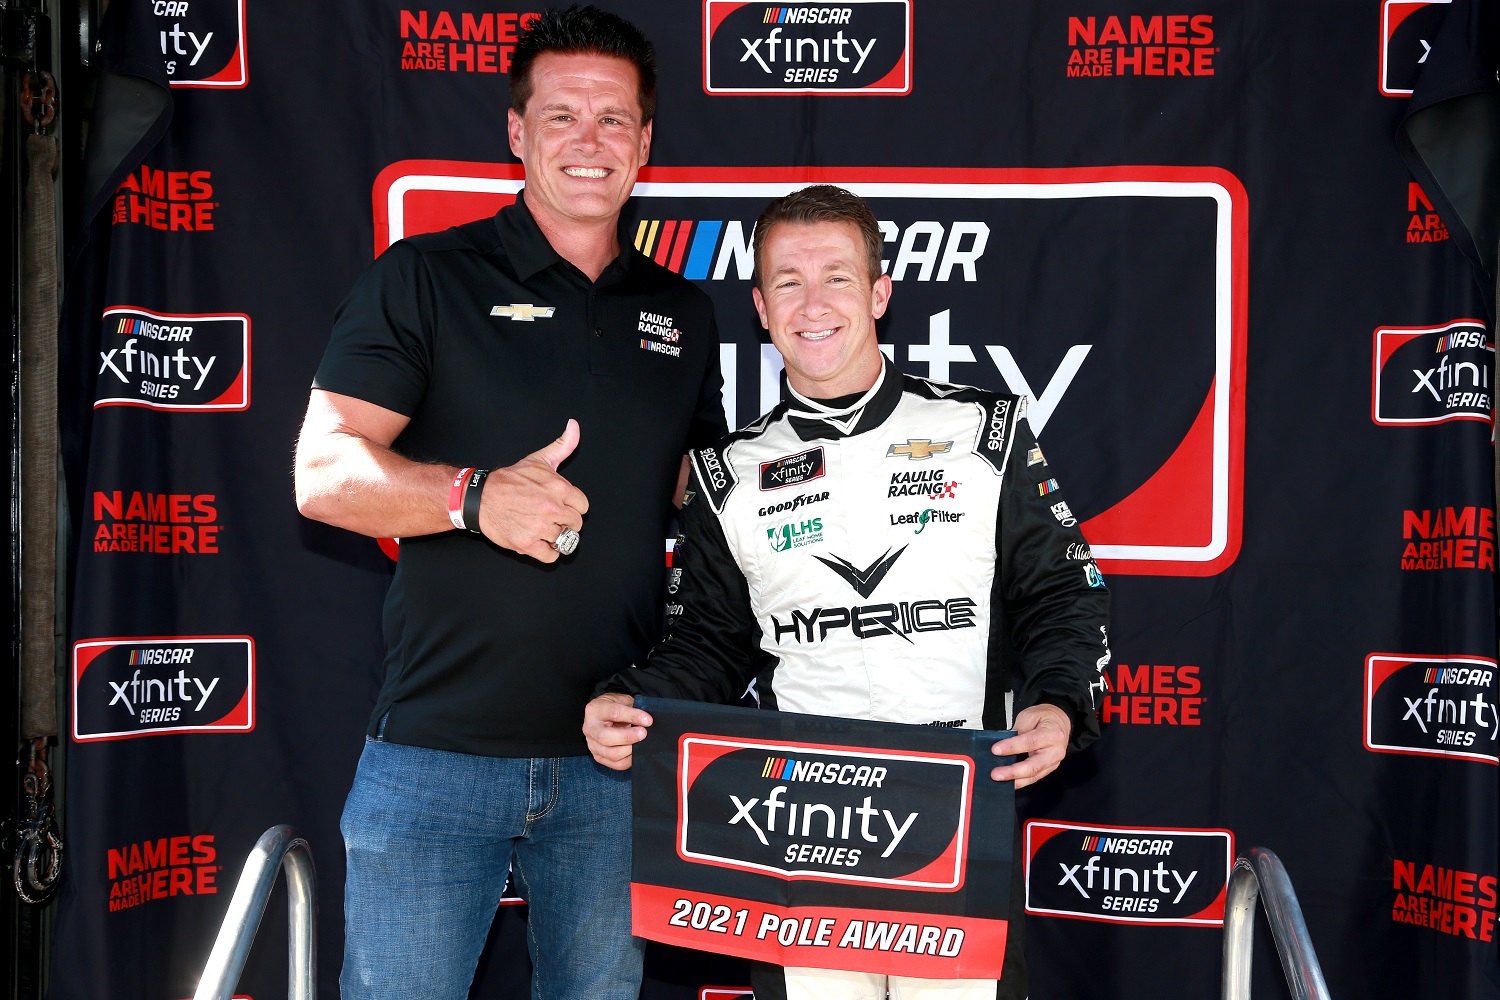 Matt Kaulig and driver AJ Allmendinger pose for photos after Allmendinger captured the pole for the NASCAR Xfinity Series Pennzoil 150 at the Brickyard at Indianapolis Motor Speedway on Aug. 14, 2021. | Sean Gardner/Getty Images